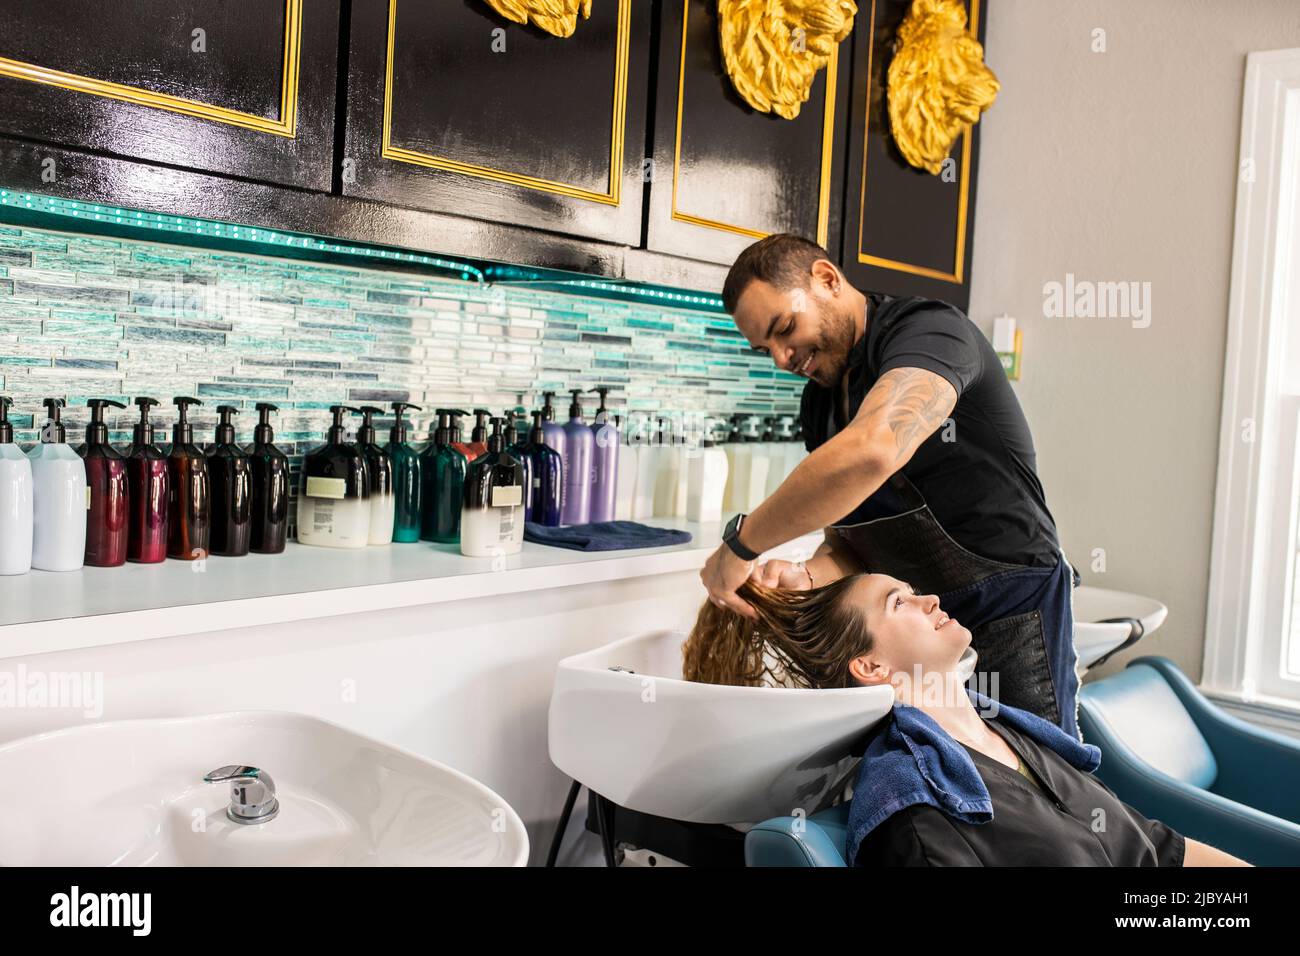 Stylist washing young woman’s hair in sink at boutique salon Stock Photo